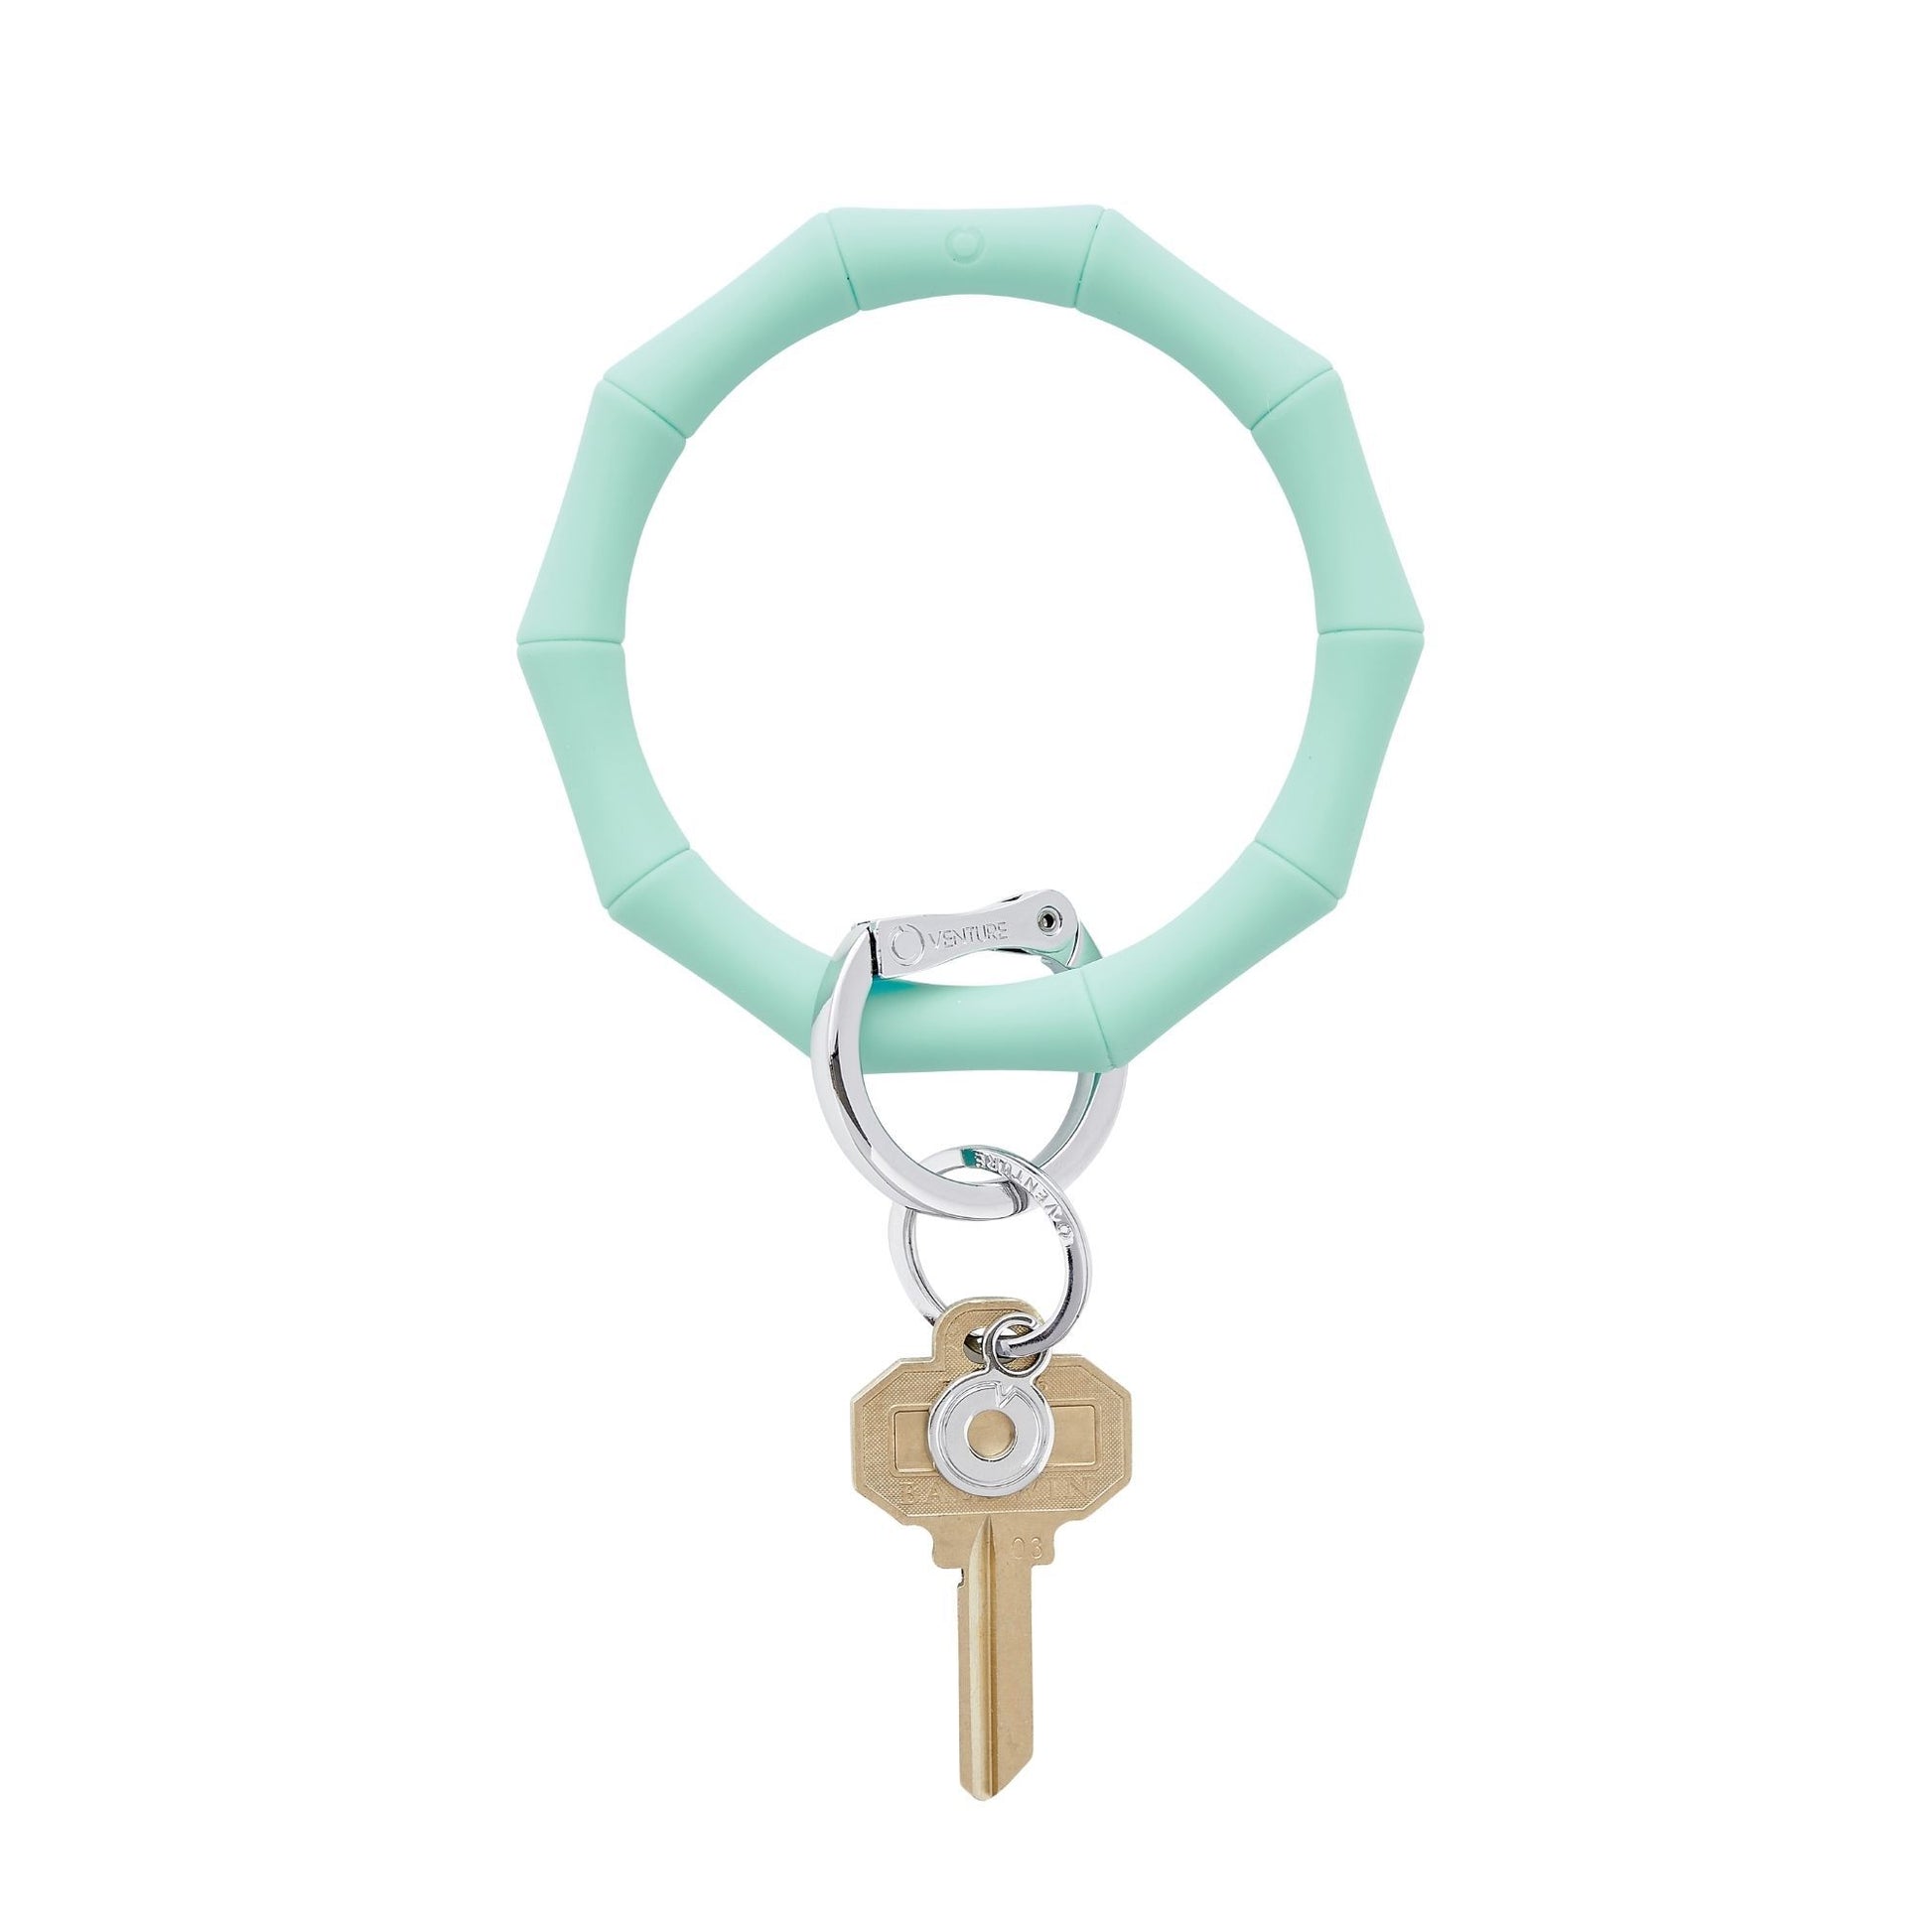 Pistachio bamboo silicone big O key ring with silver locking clasp